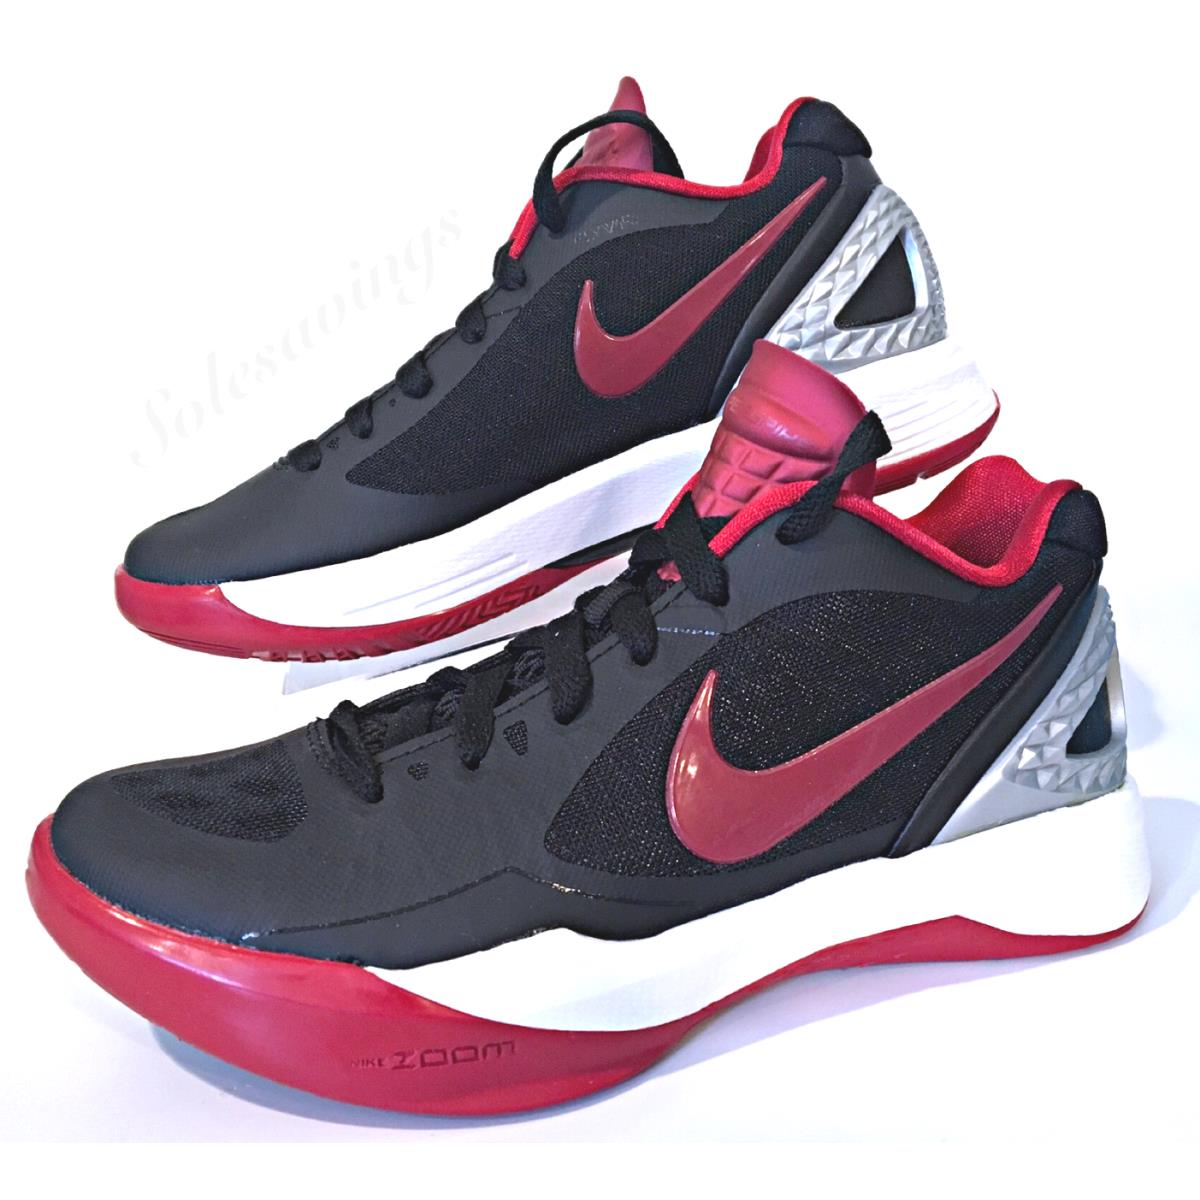 Evaluación Planeta torre Womens Nike Volley Zoom Hyperspike Volleyball Shoes Black/red Size 5  585763-061 | 884499656906 - Nike shoes Volley Zoom Hyperspike - Black |  SporTipTop